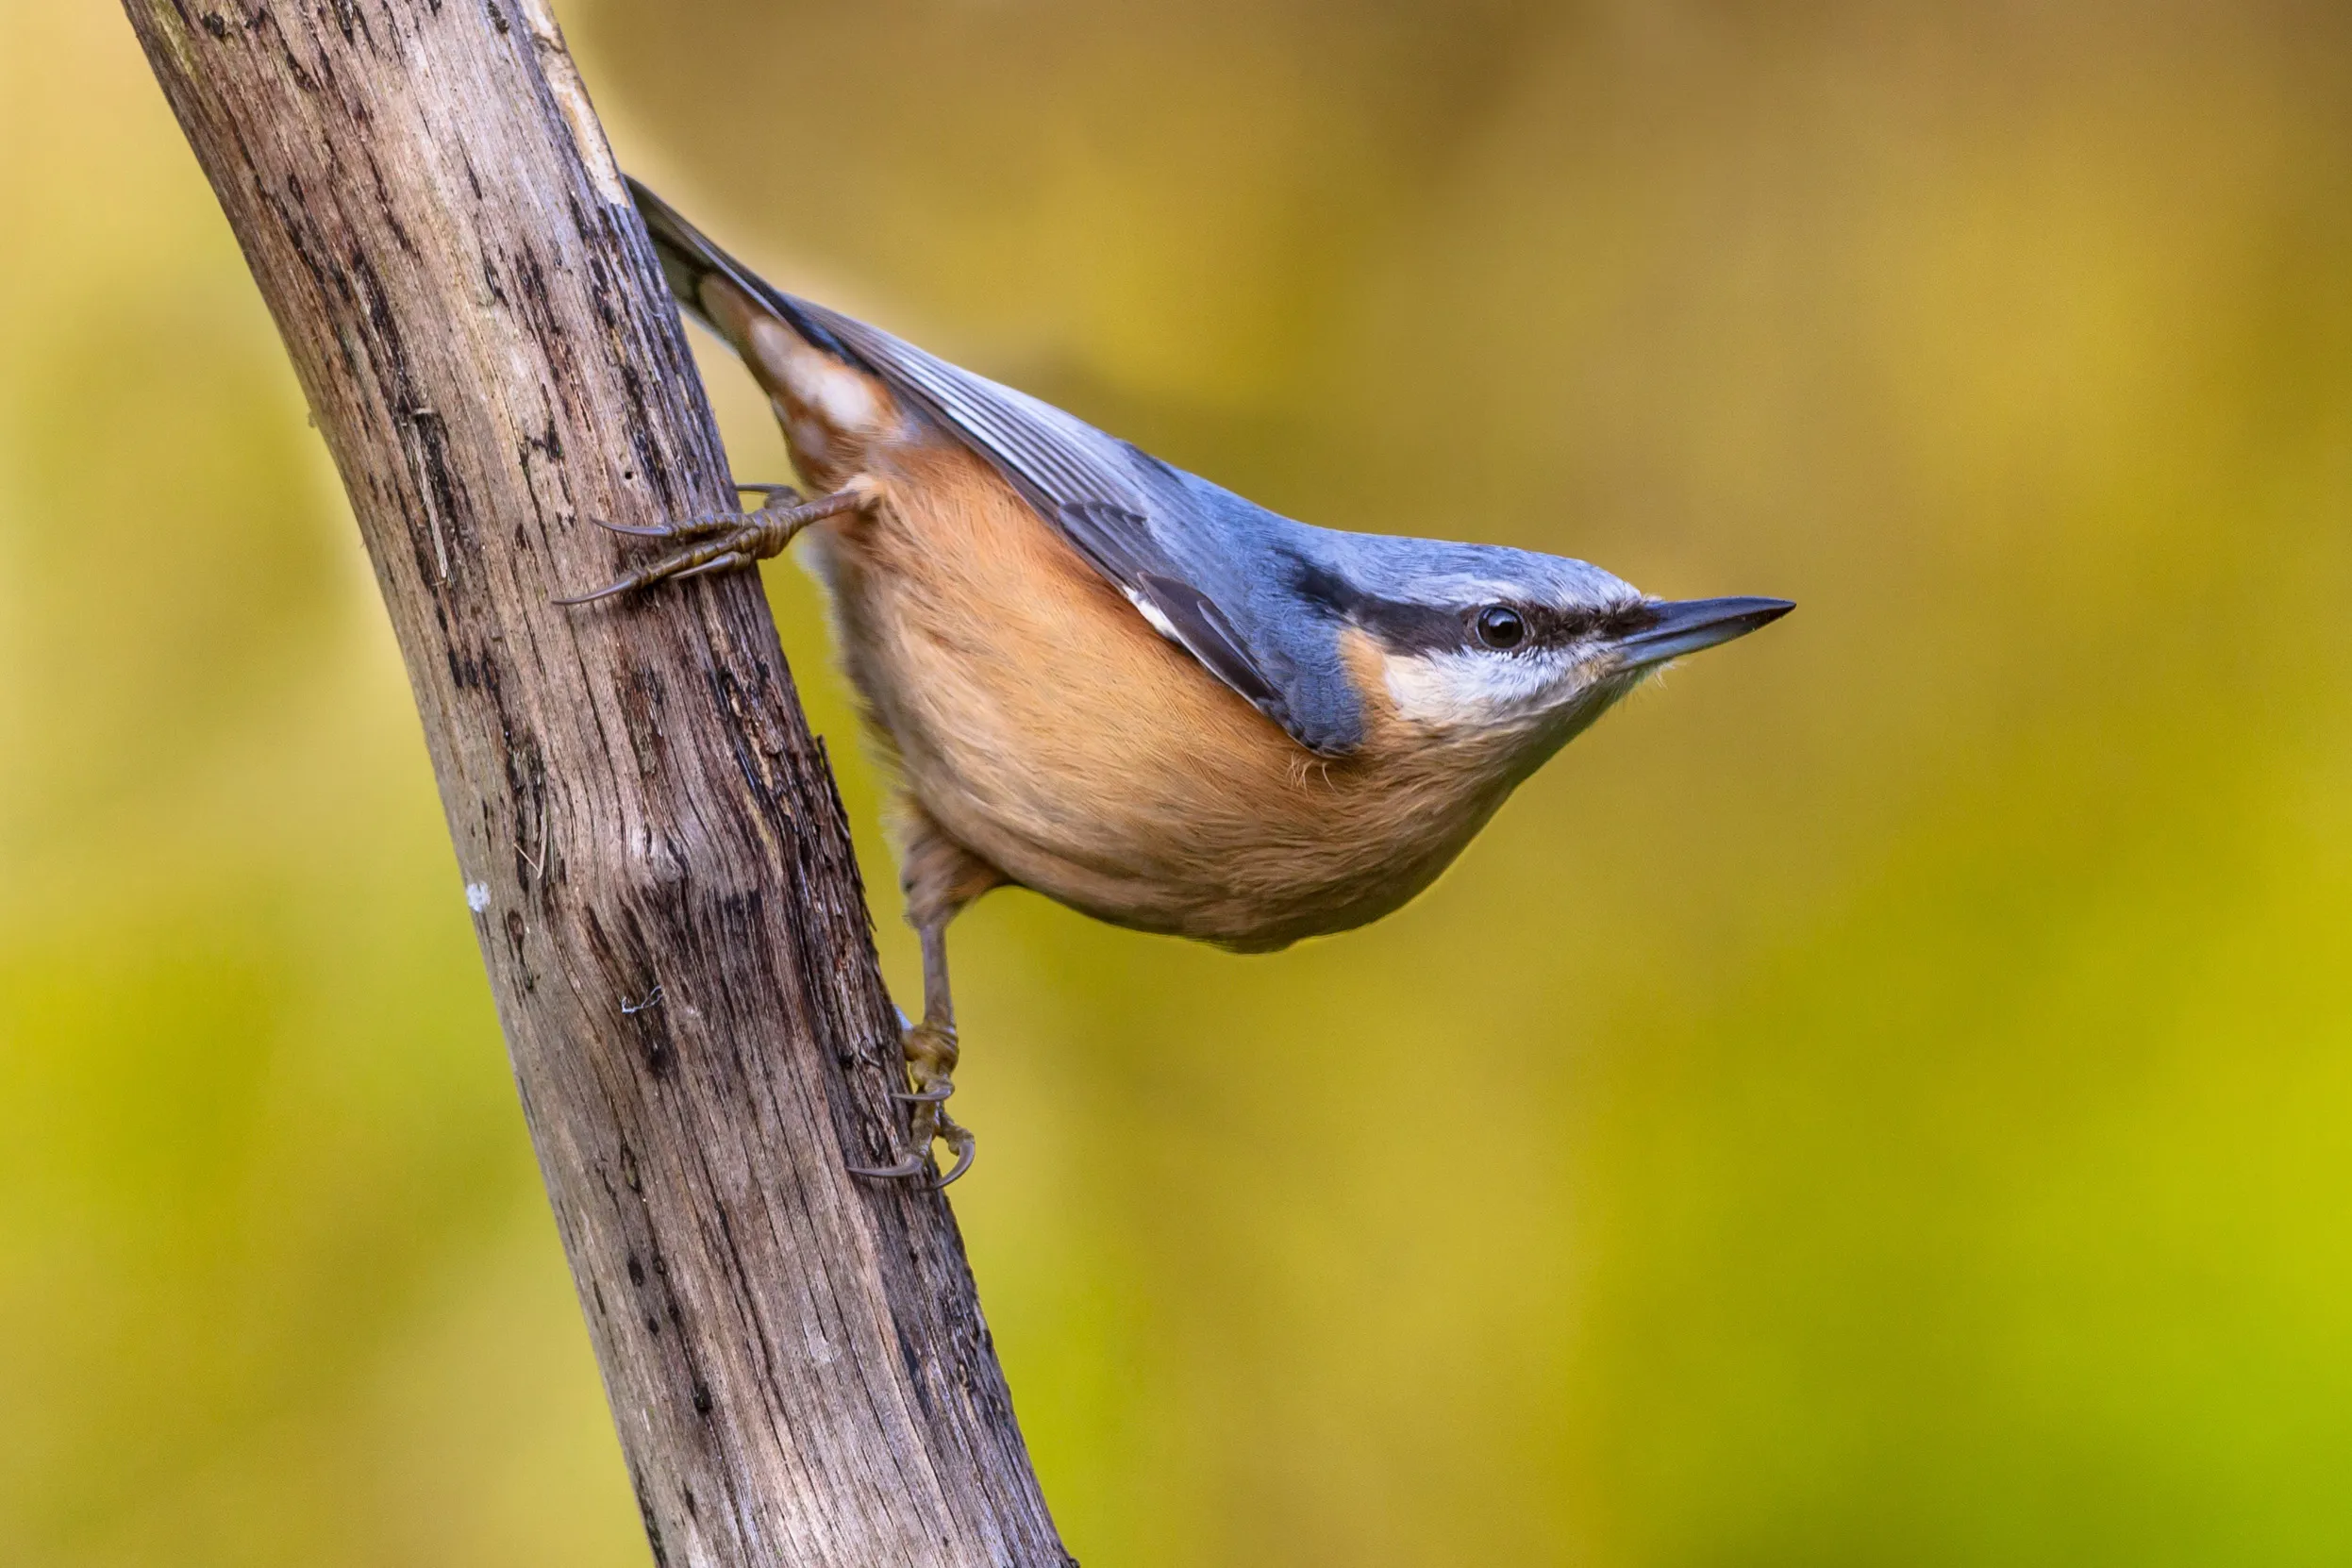 Lone Nuthatch perched on a branch, looking up